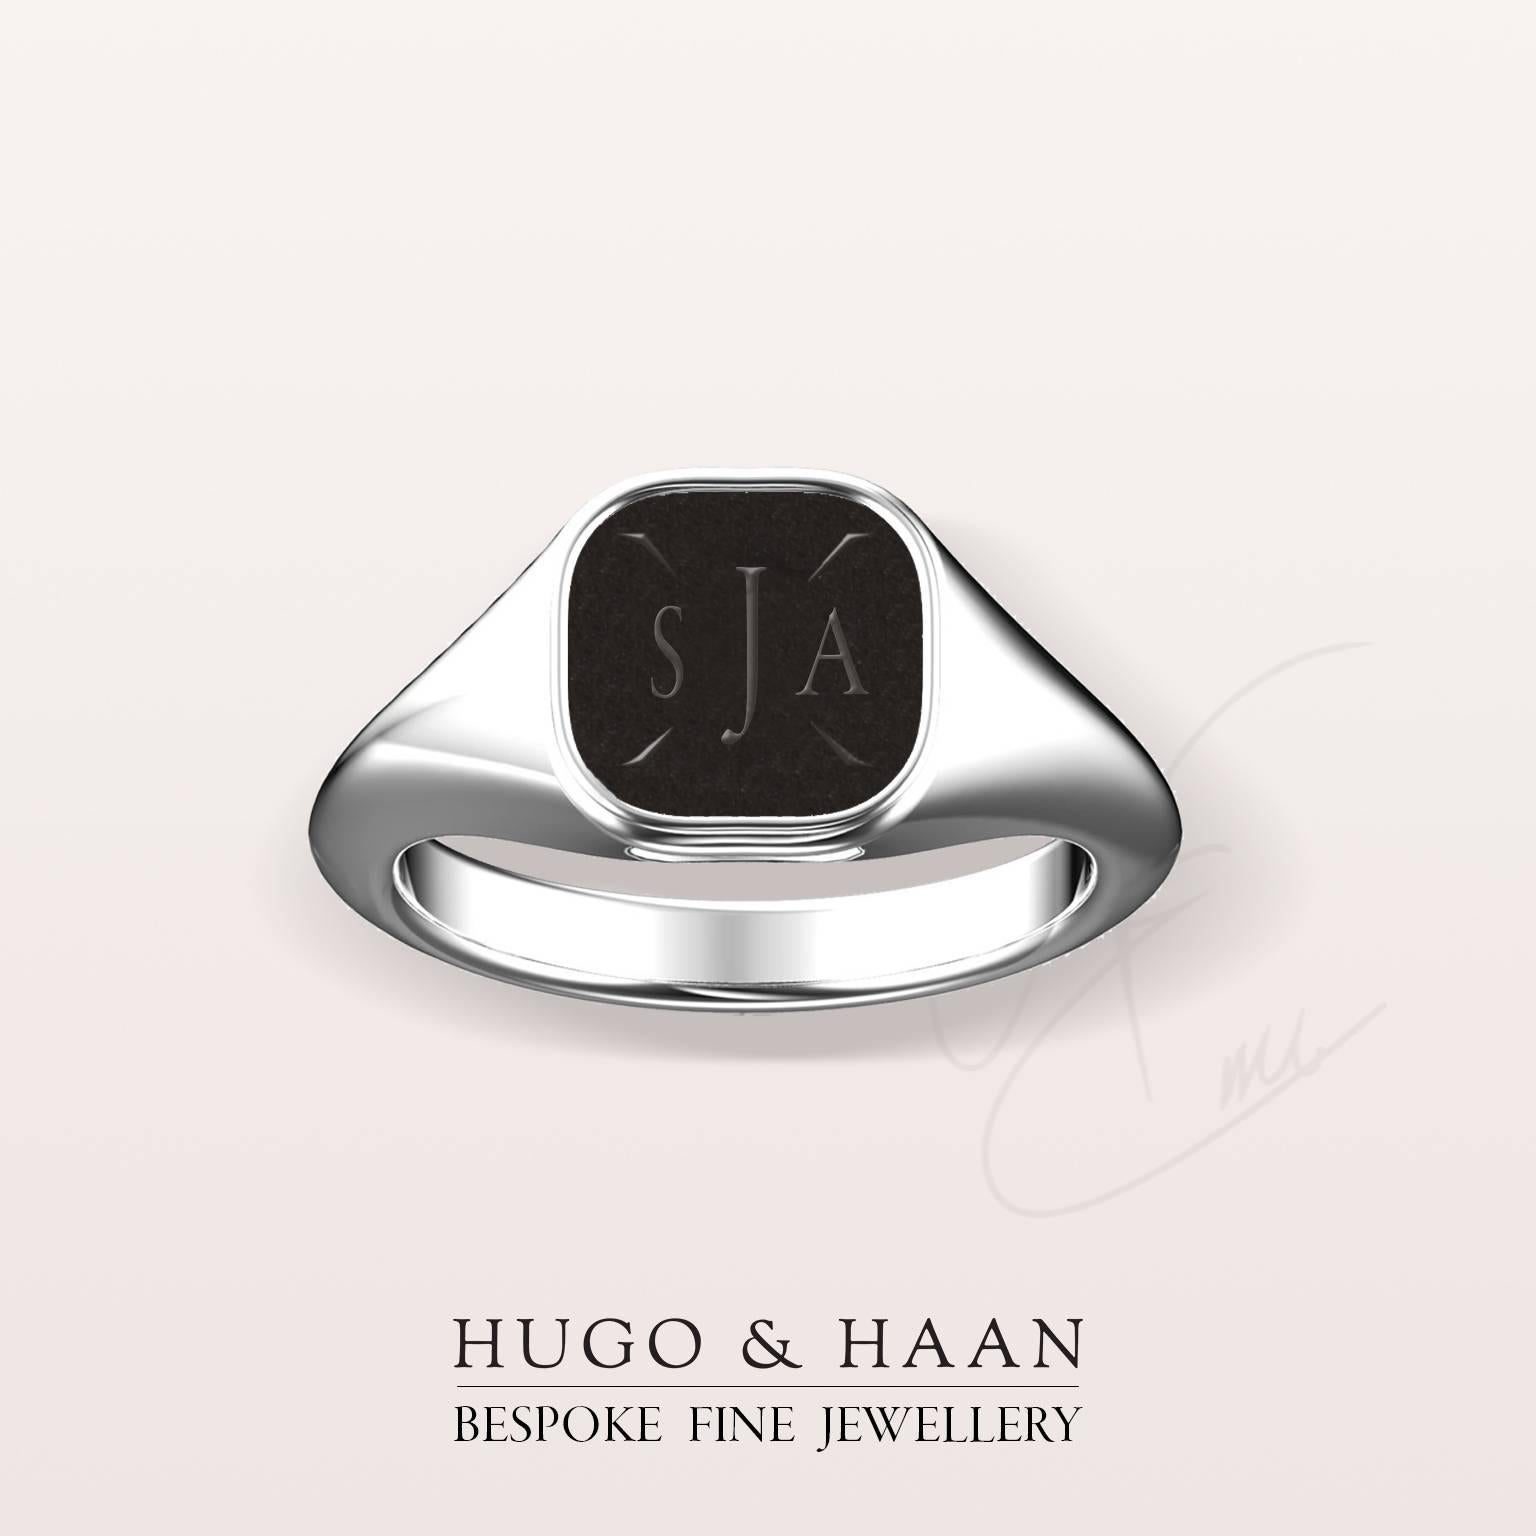 Details:

Material : 18k White Gold
Principle Gemstone : Black Agate
Other Gemstone : -
Customizable: Yes

Options to customize: 

Metals available : Platinum, 18kt Yellow Gold or 18kt White Gold
Gemstones Available : All that can be carved and is